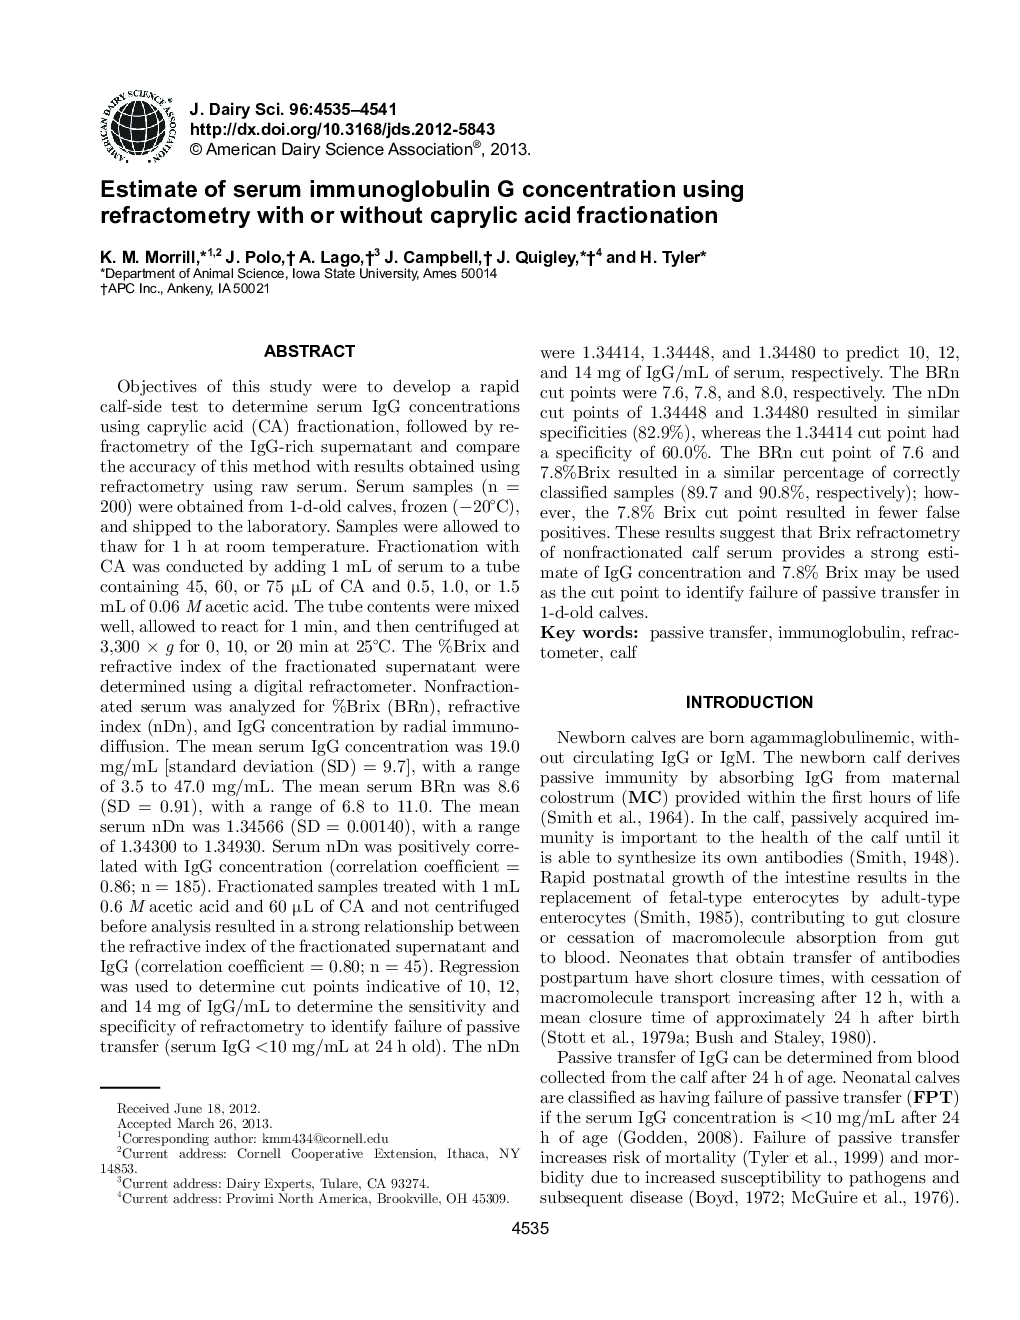 Estimate of serum immunoglobulin G concentration using refractometry with or without caprylic acid fractionation